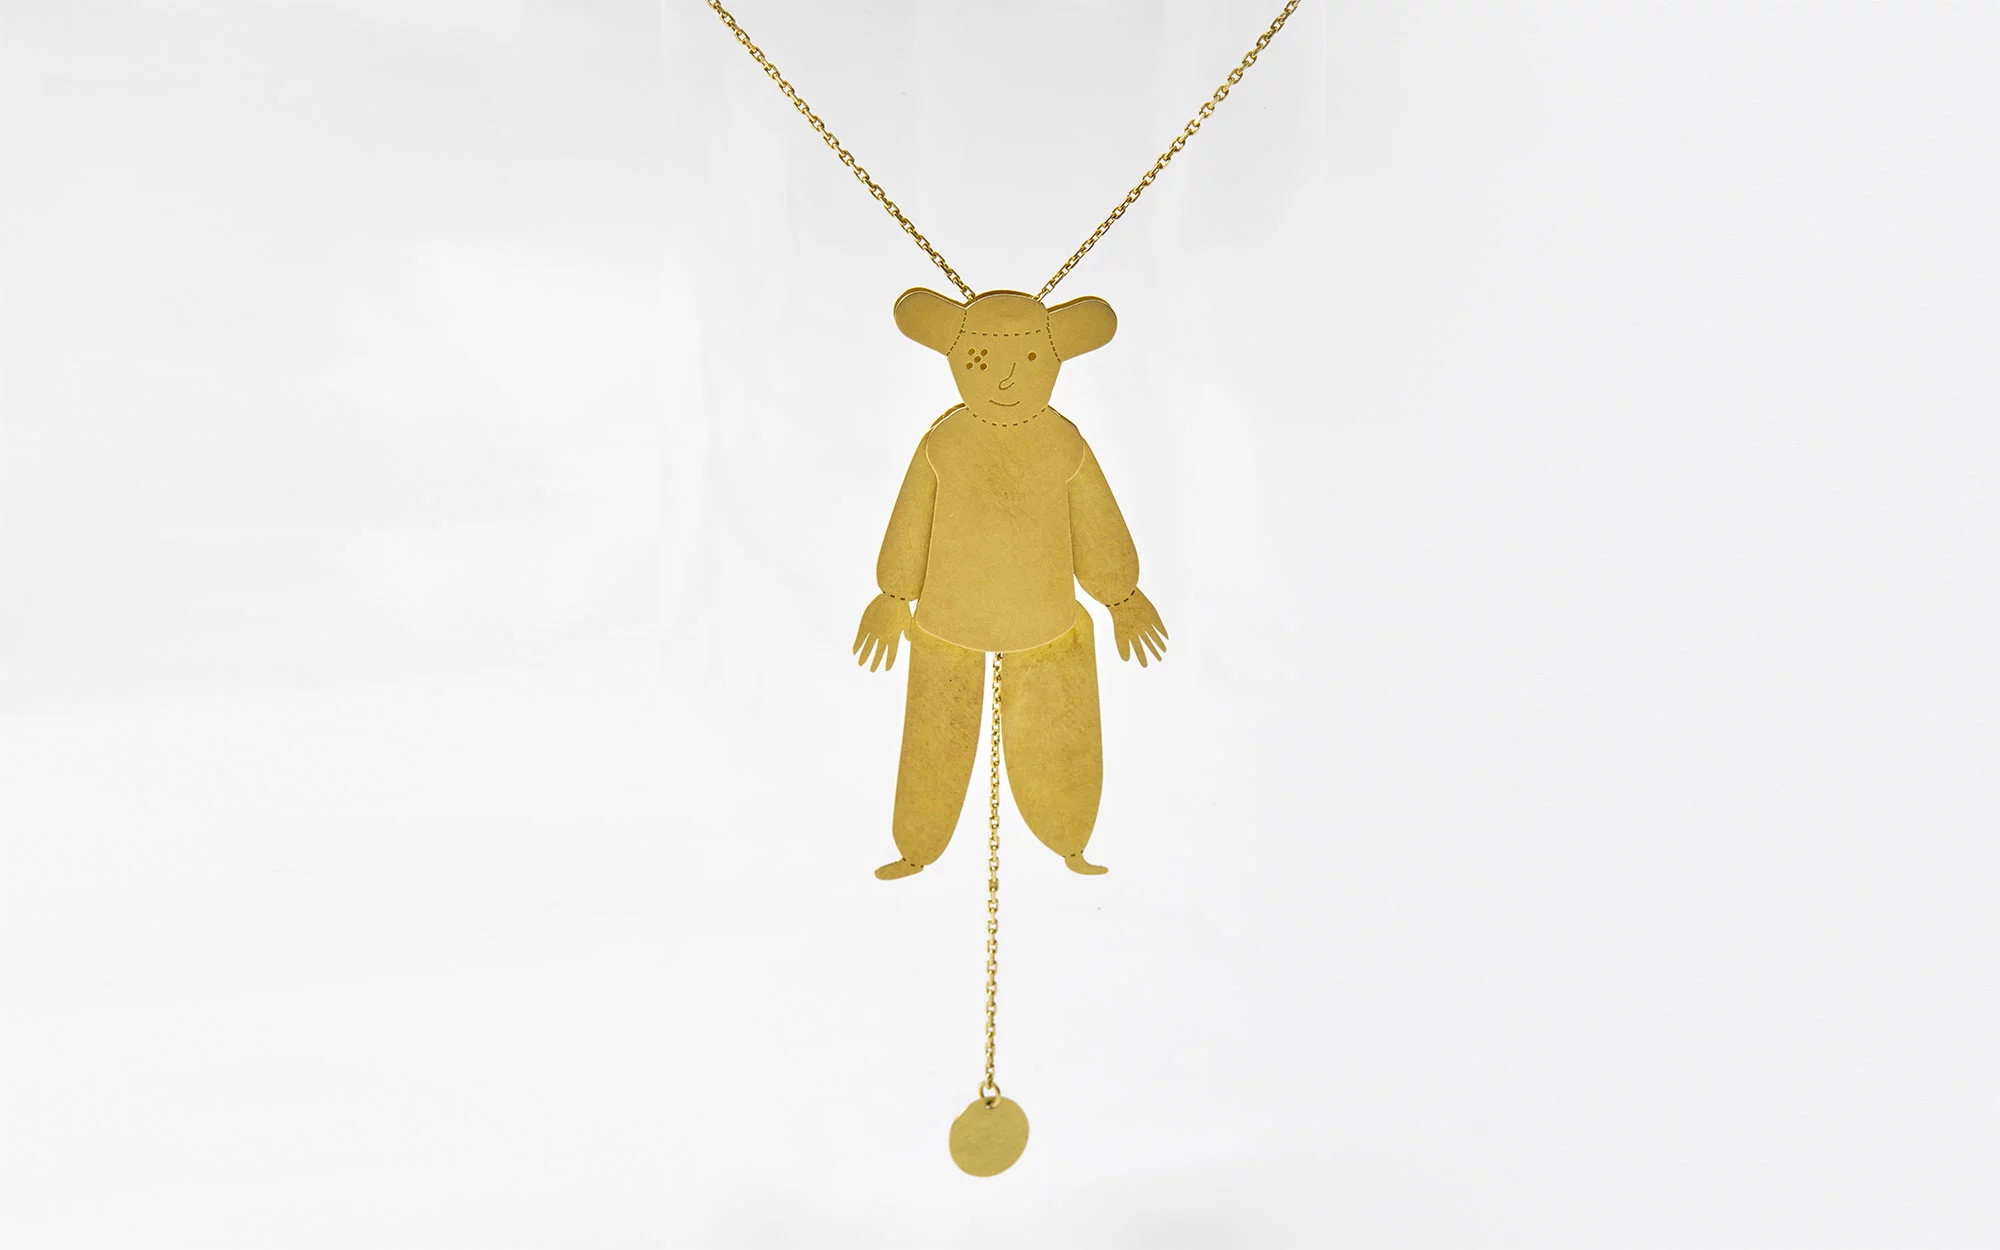 Muneco Necklace - Jaime Hayon - Art and Drawing - Galerie kreo